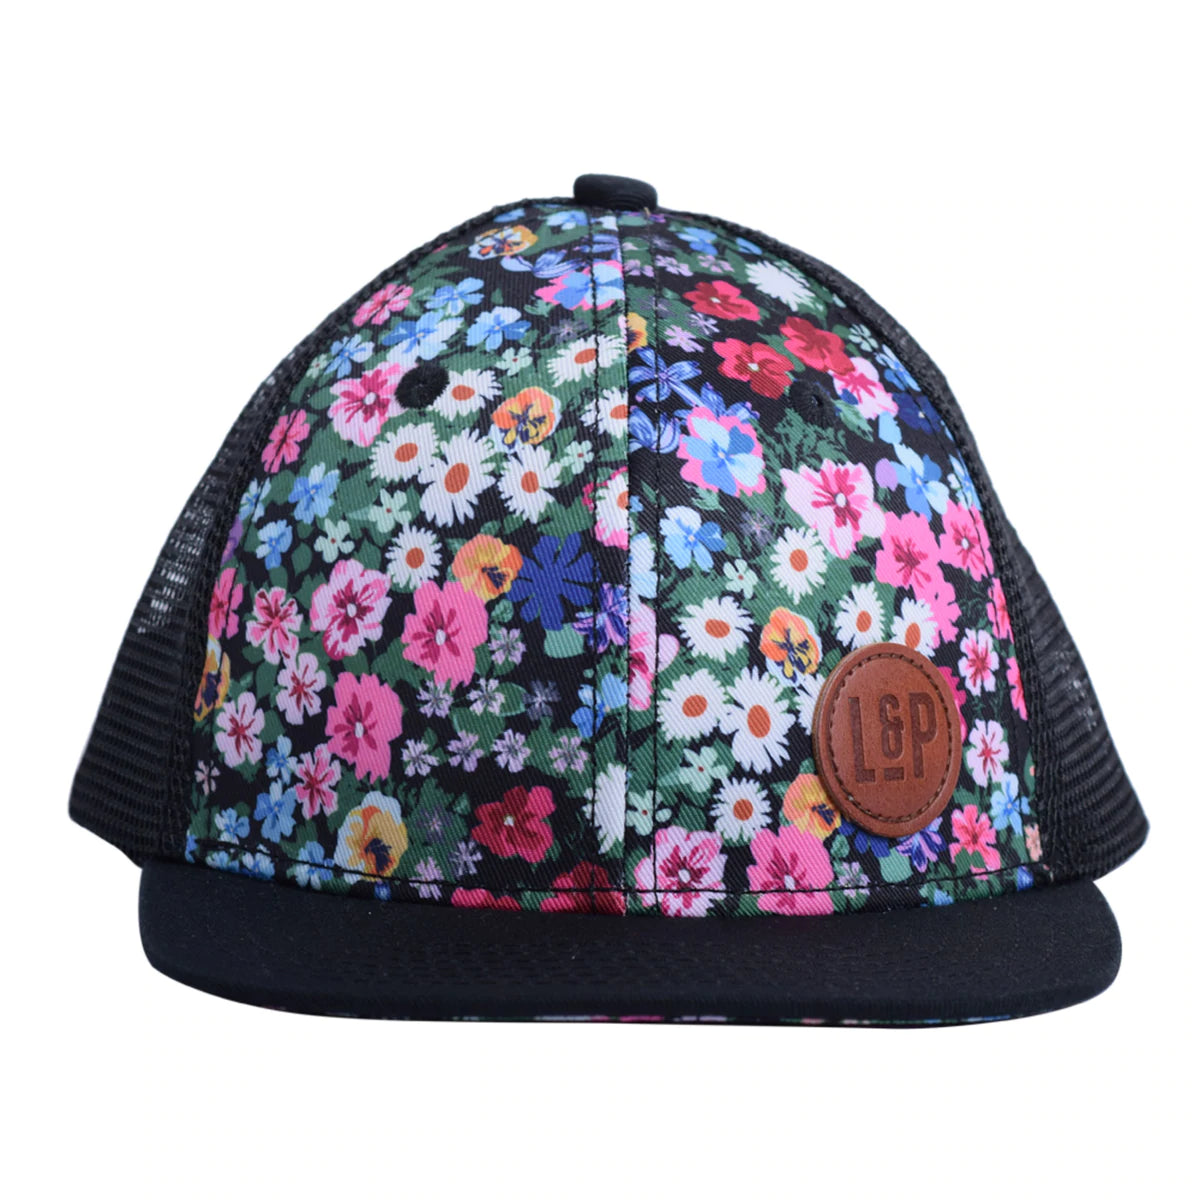 Casquette Snapback (Taal)